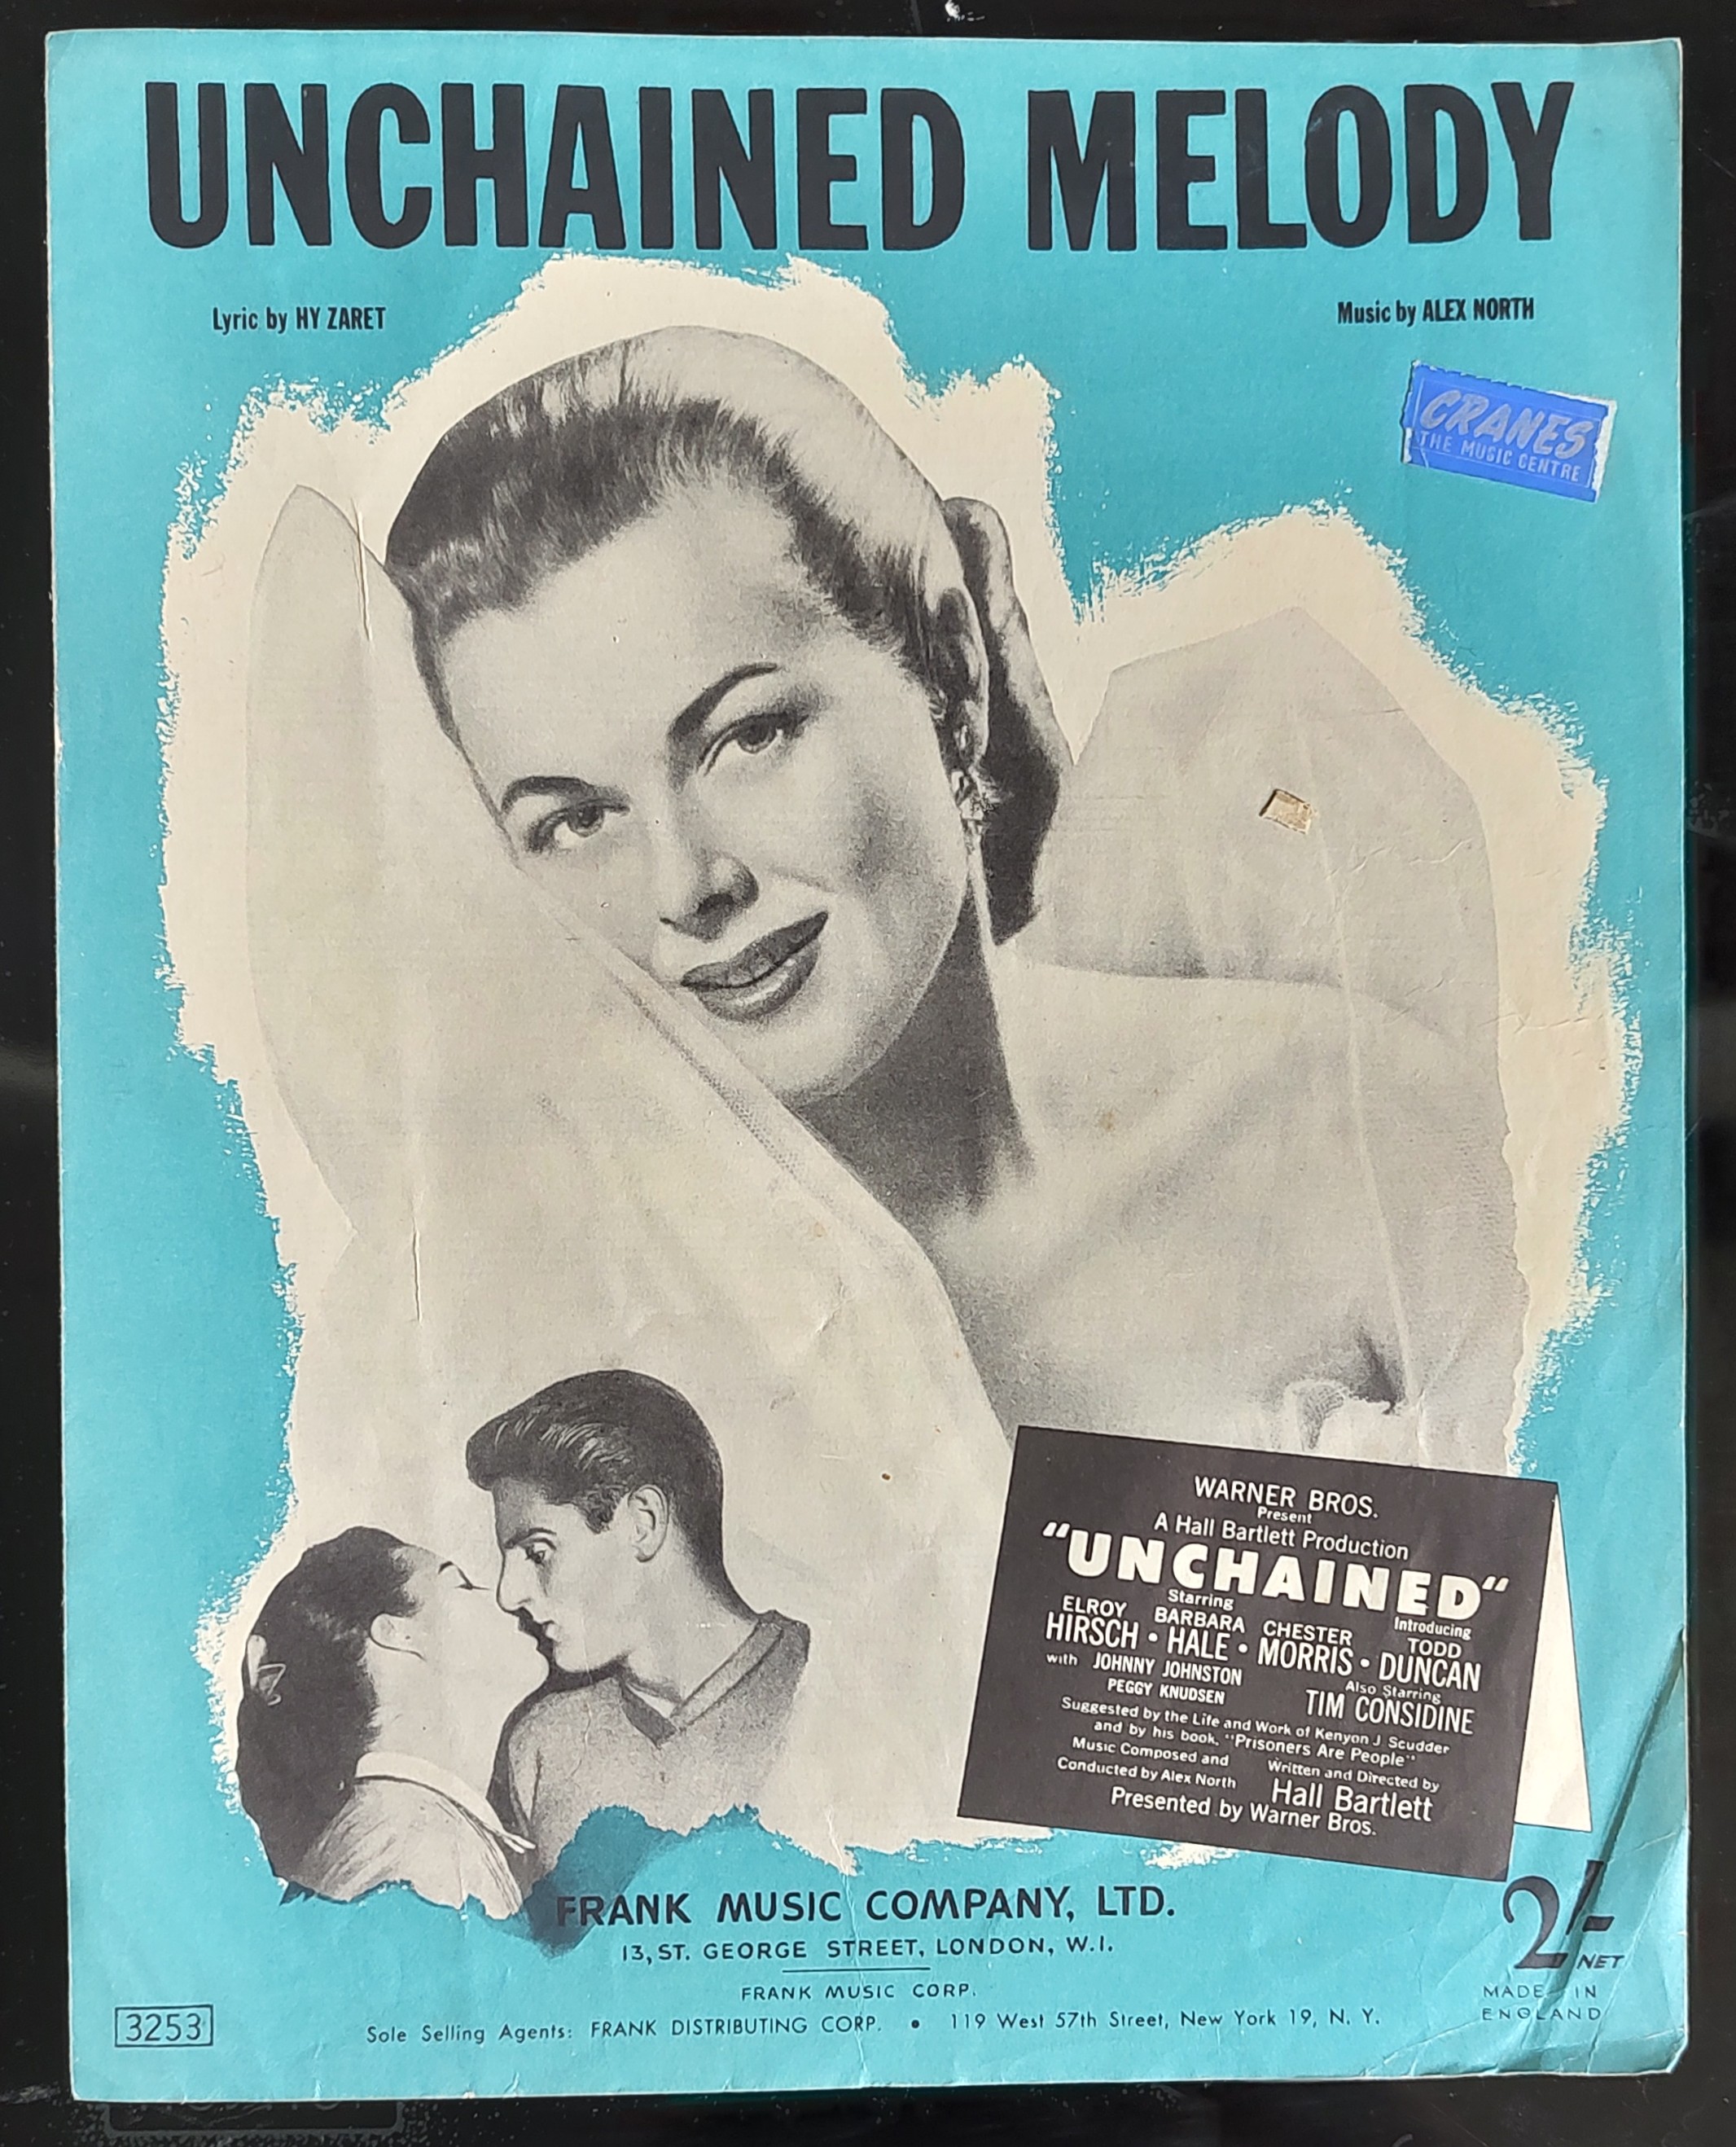 unchained melody wikipedia